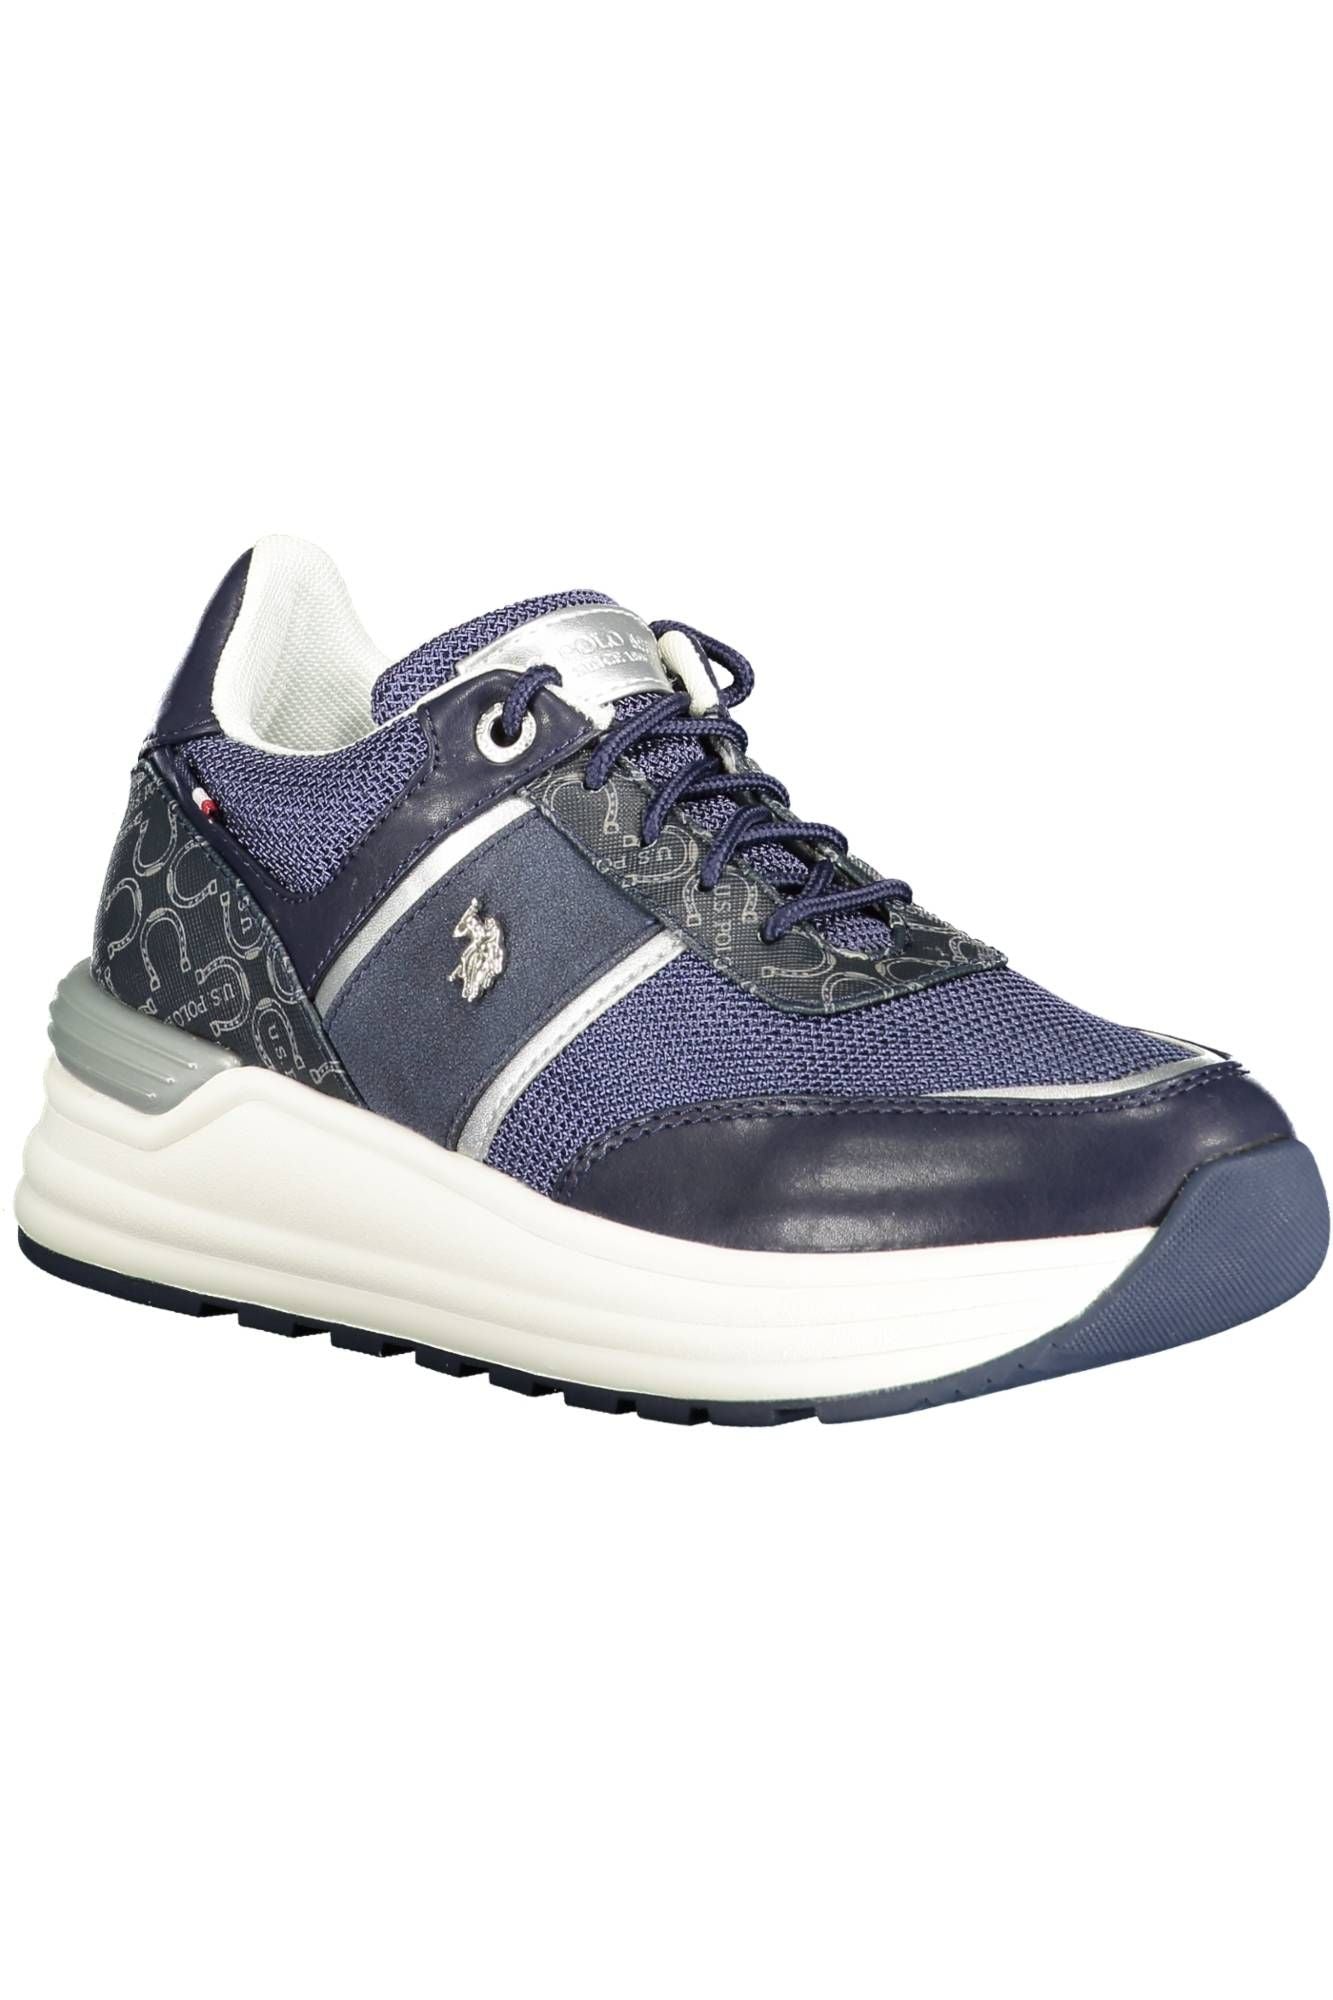 U.S. POLO ASSN. Chic Blue Lace-Up Sport Sneakers